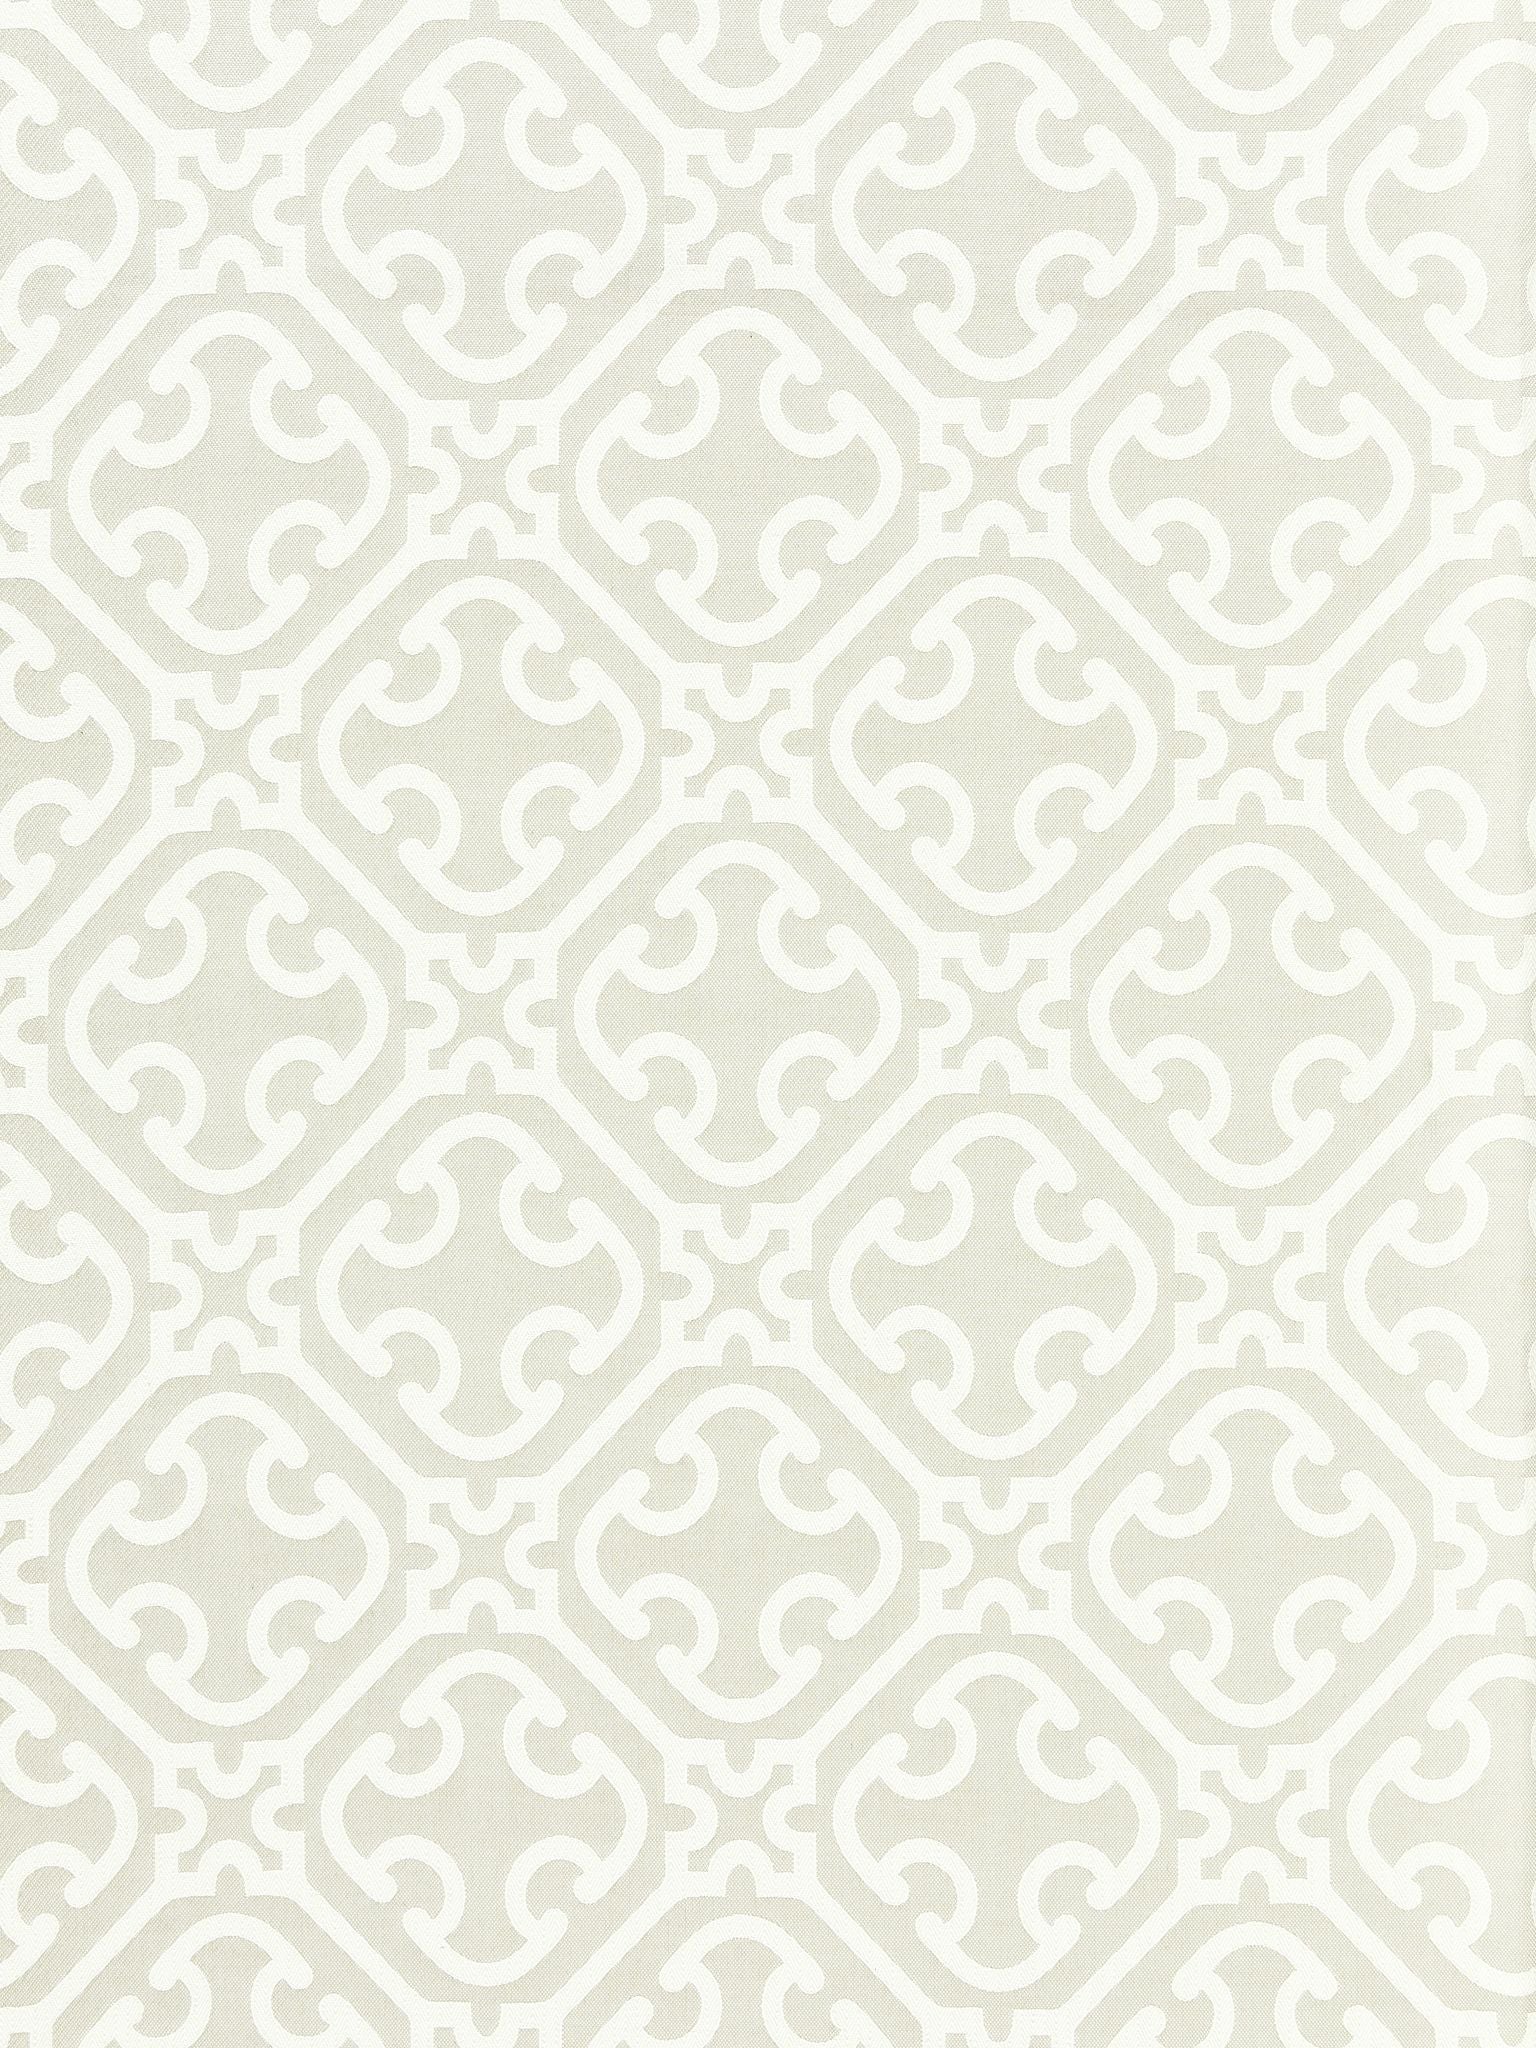 Ailin Lattice Weave fabric in linen color - pattern number SC 000127214 - by Scalamandre in the Scalamandre Fabrics Book 1 collection